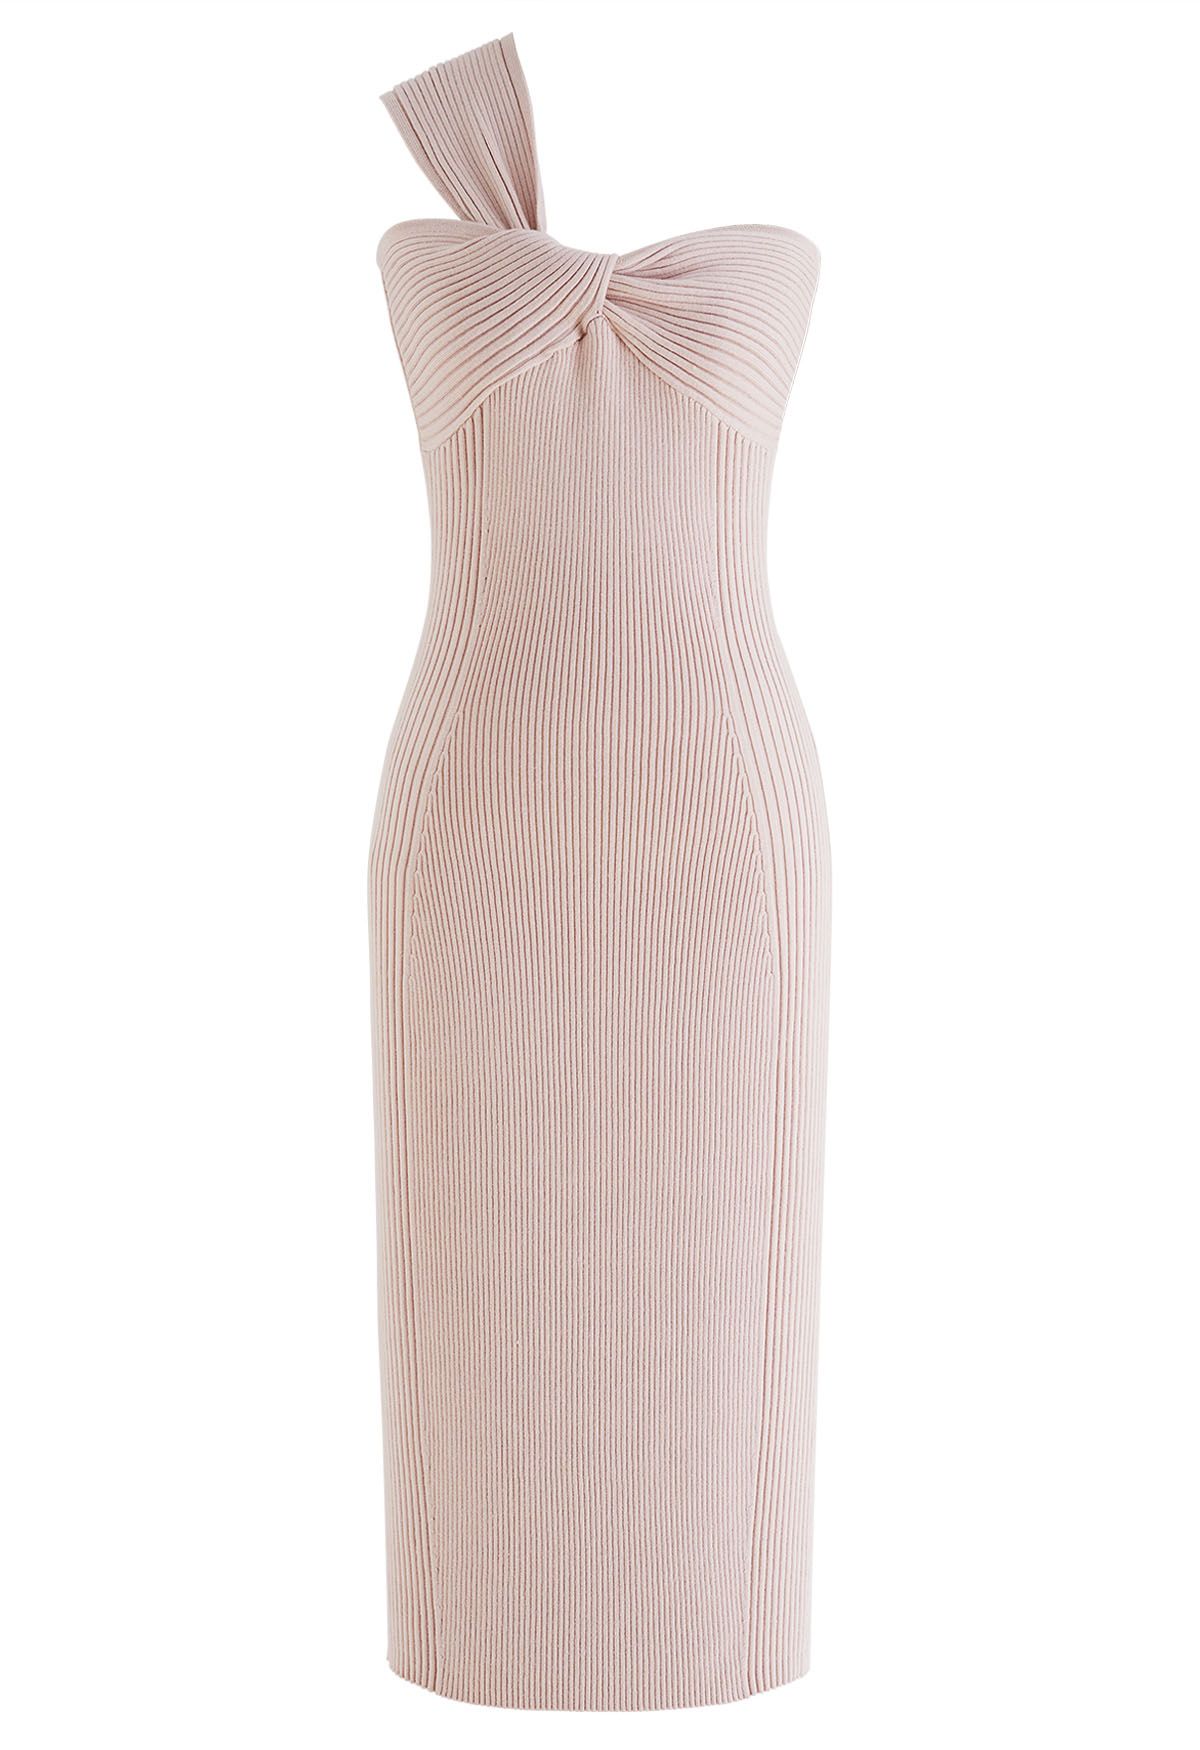 One-Shoulder Knotted Bodycon Knit Dress in Pink